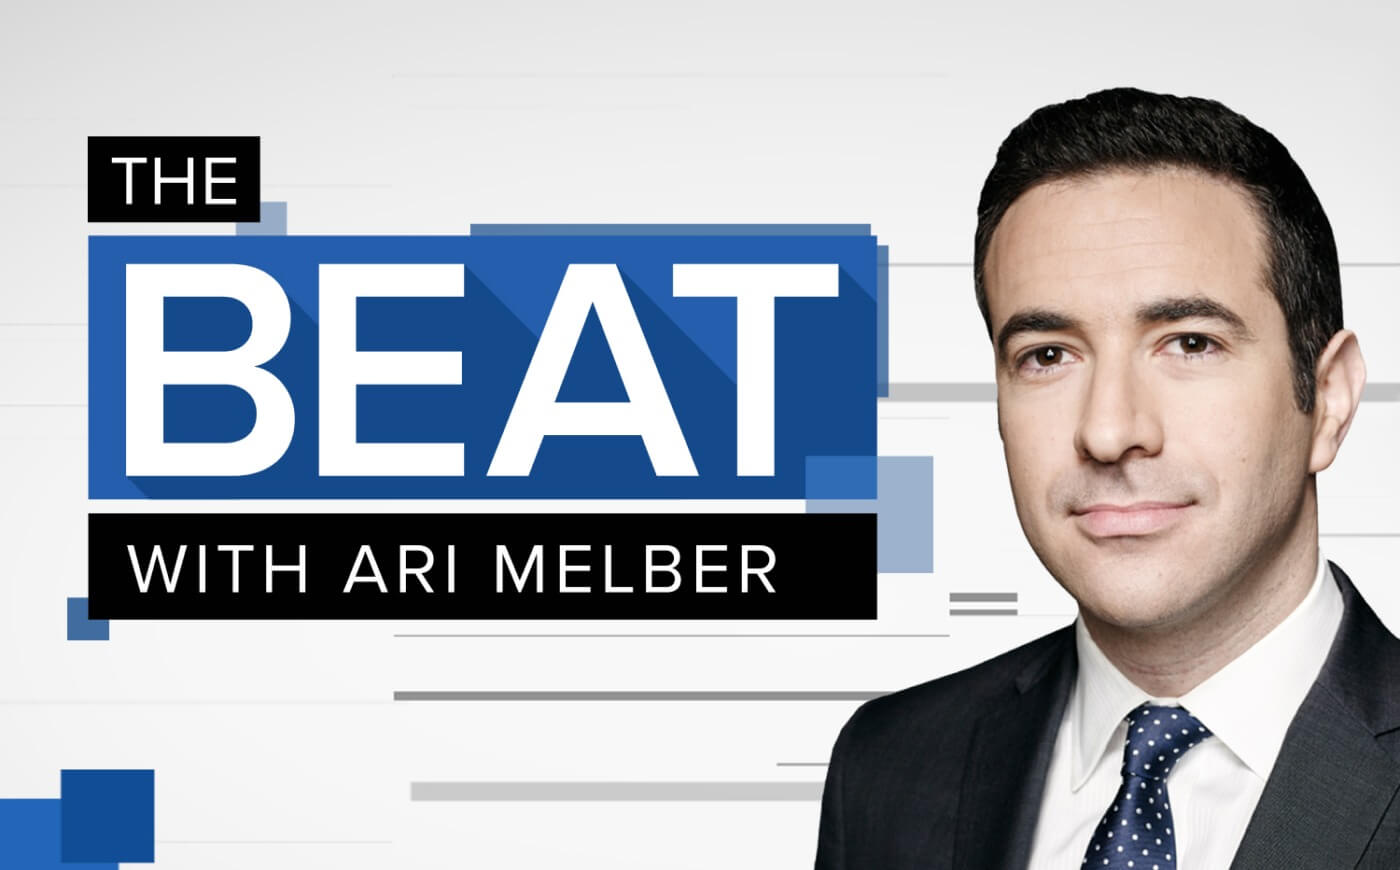 PersonalizedThe Beat with Ari Melber Personalized Champagne Flute